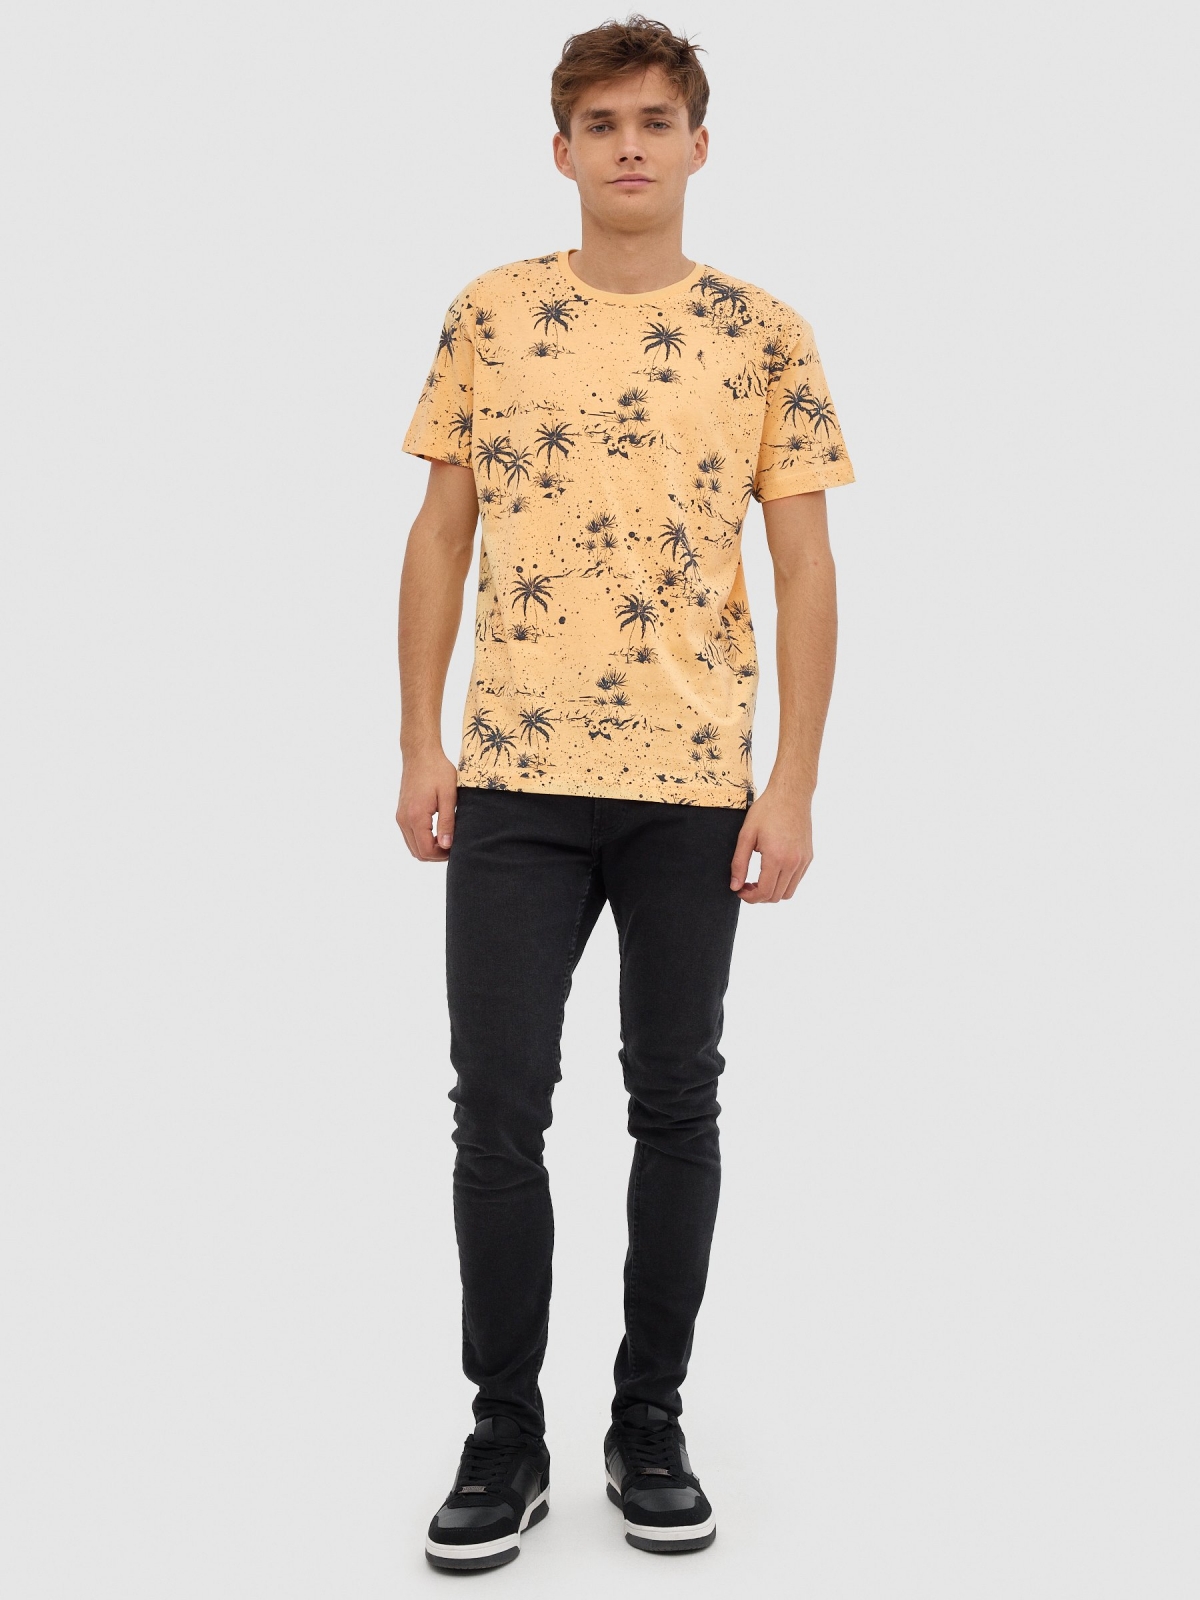 Palms T-shirt yellow front view